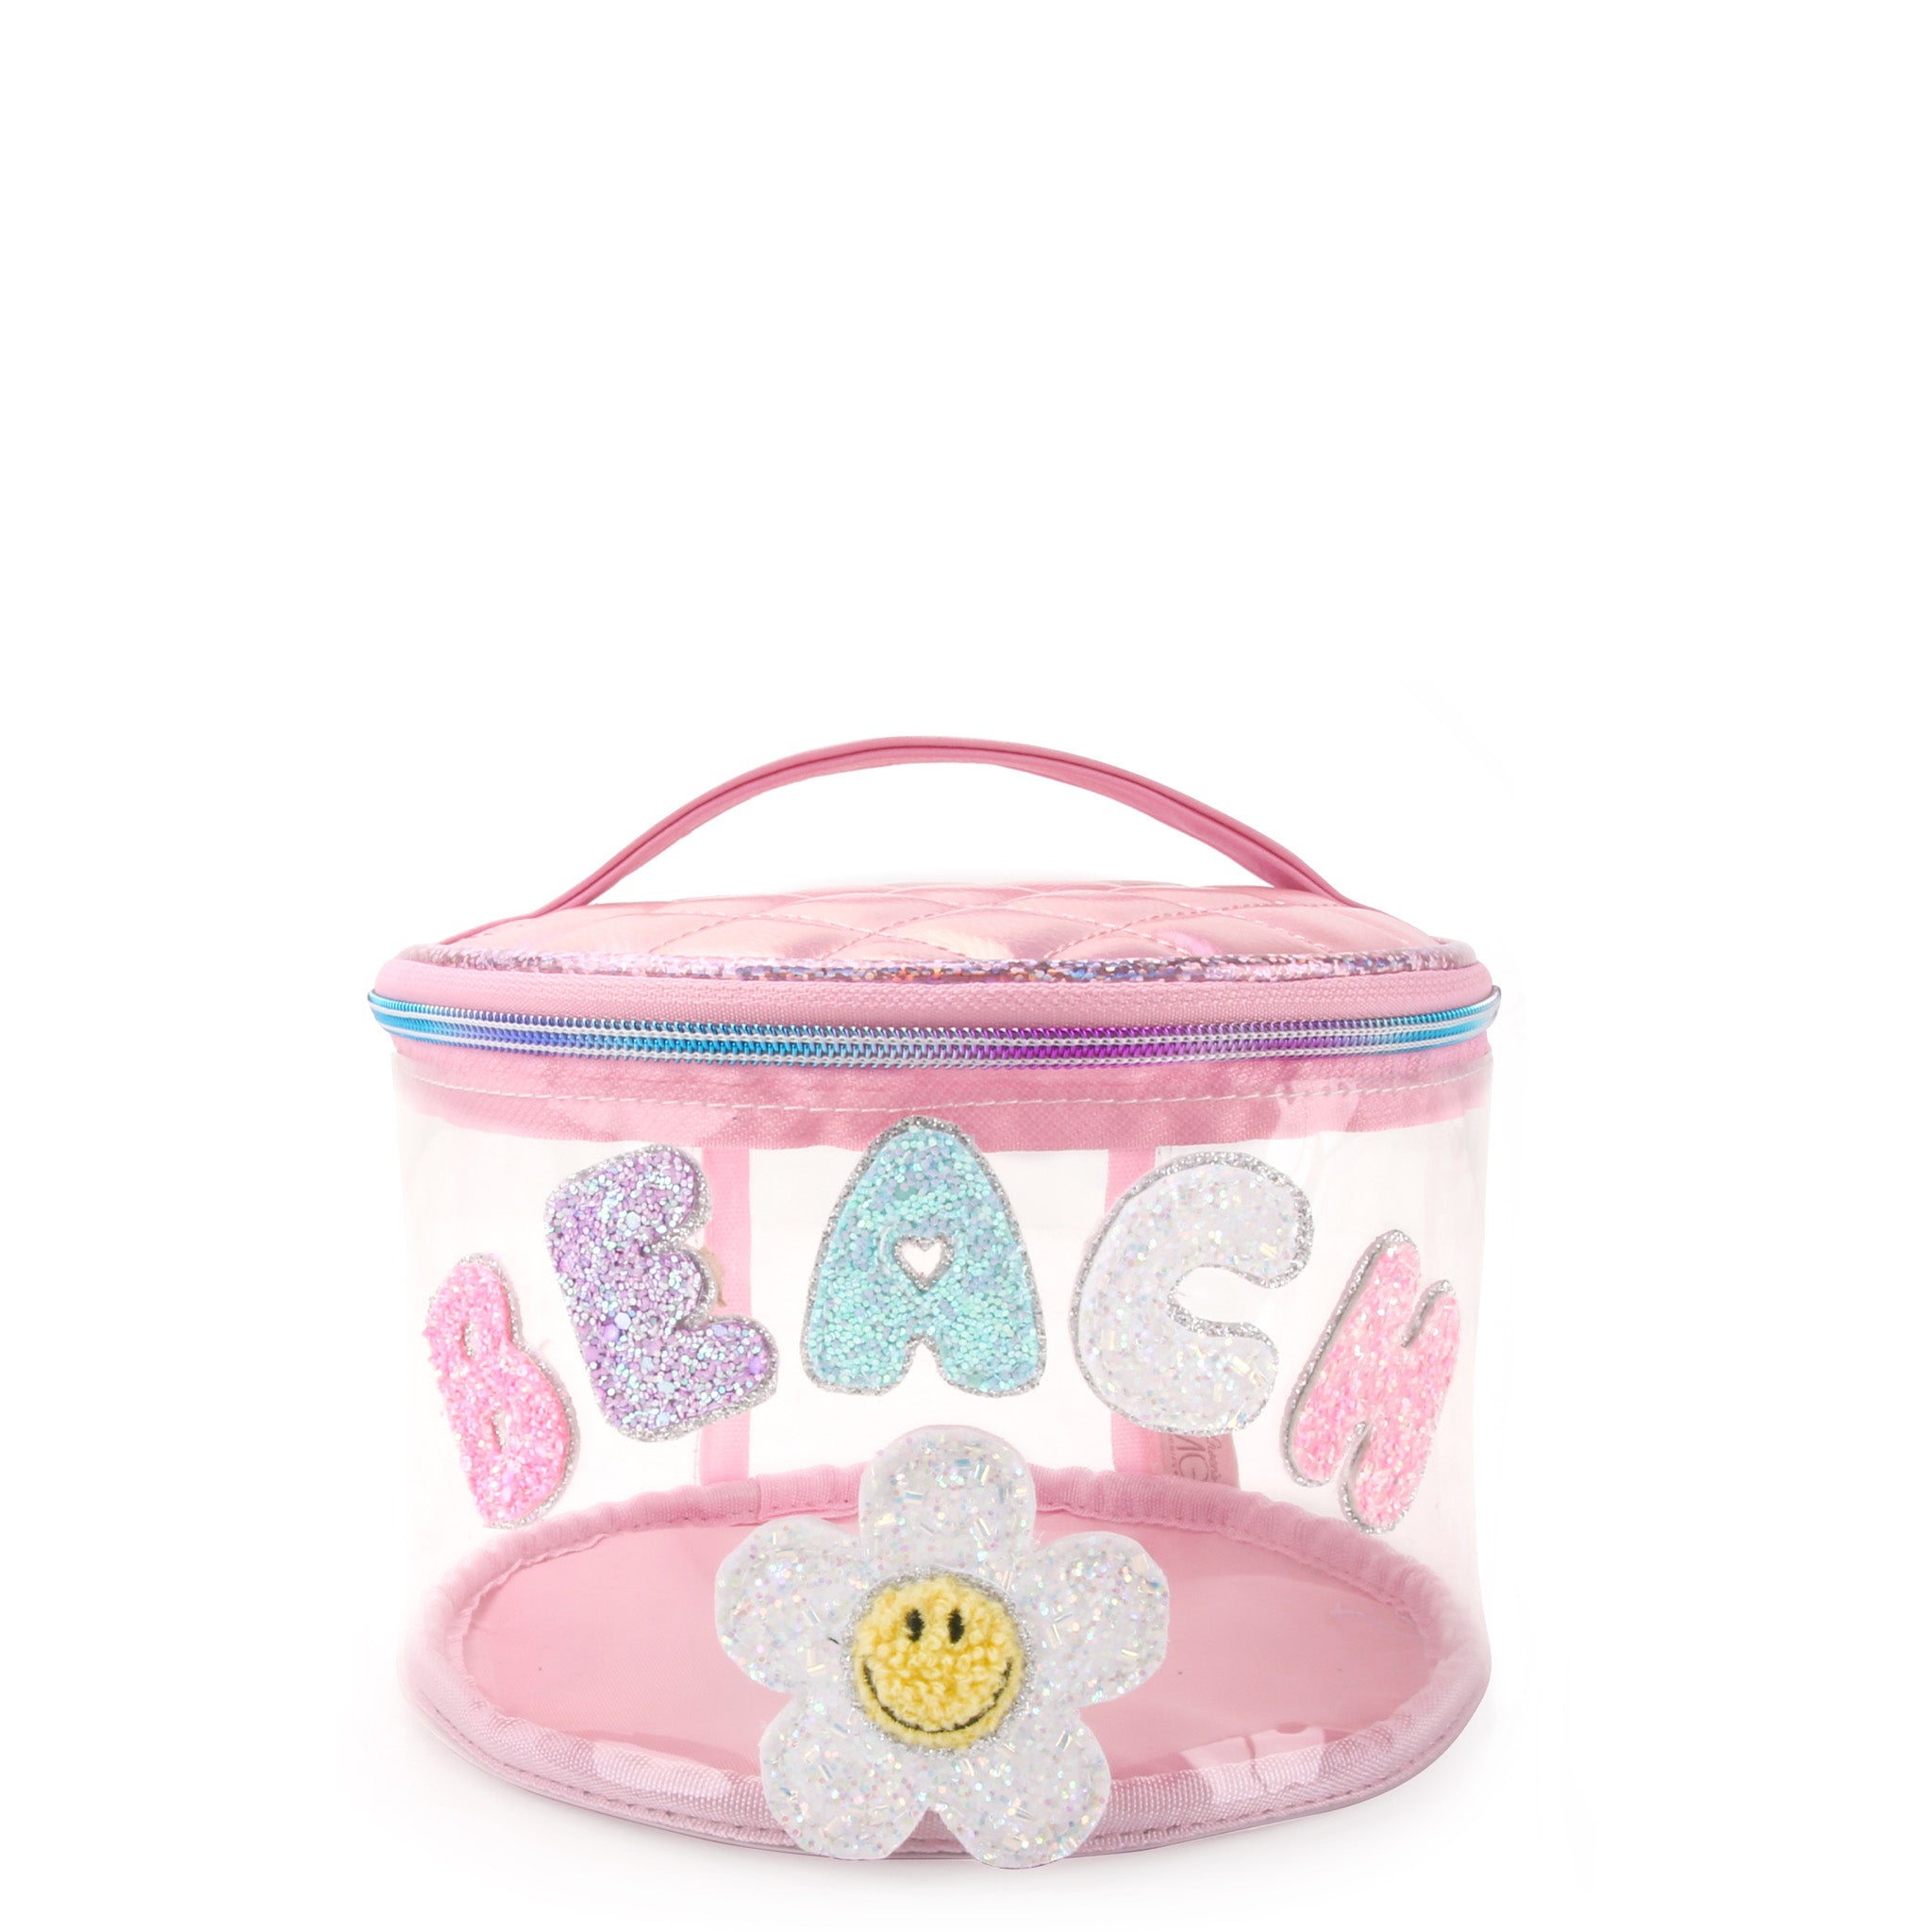 Front view of clear 'Beach' glam bag with daisy patch